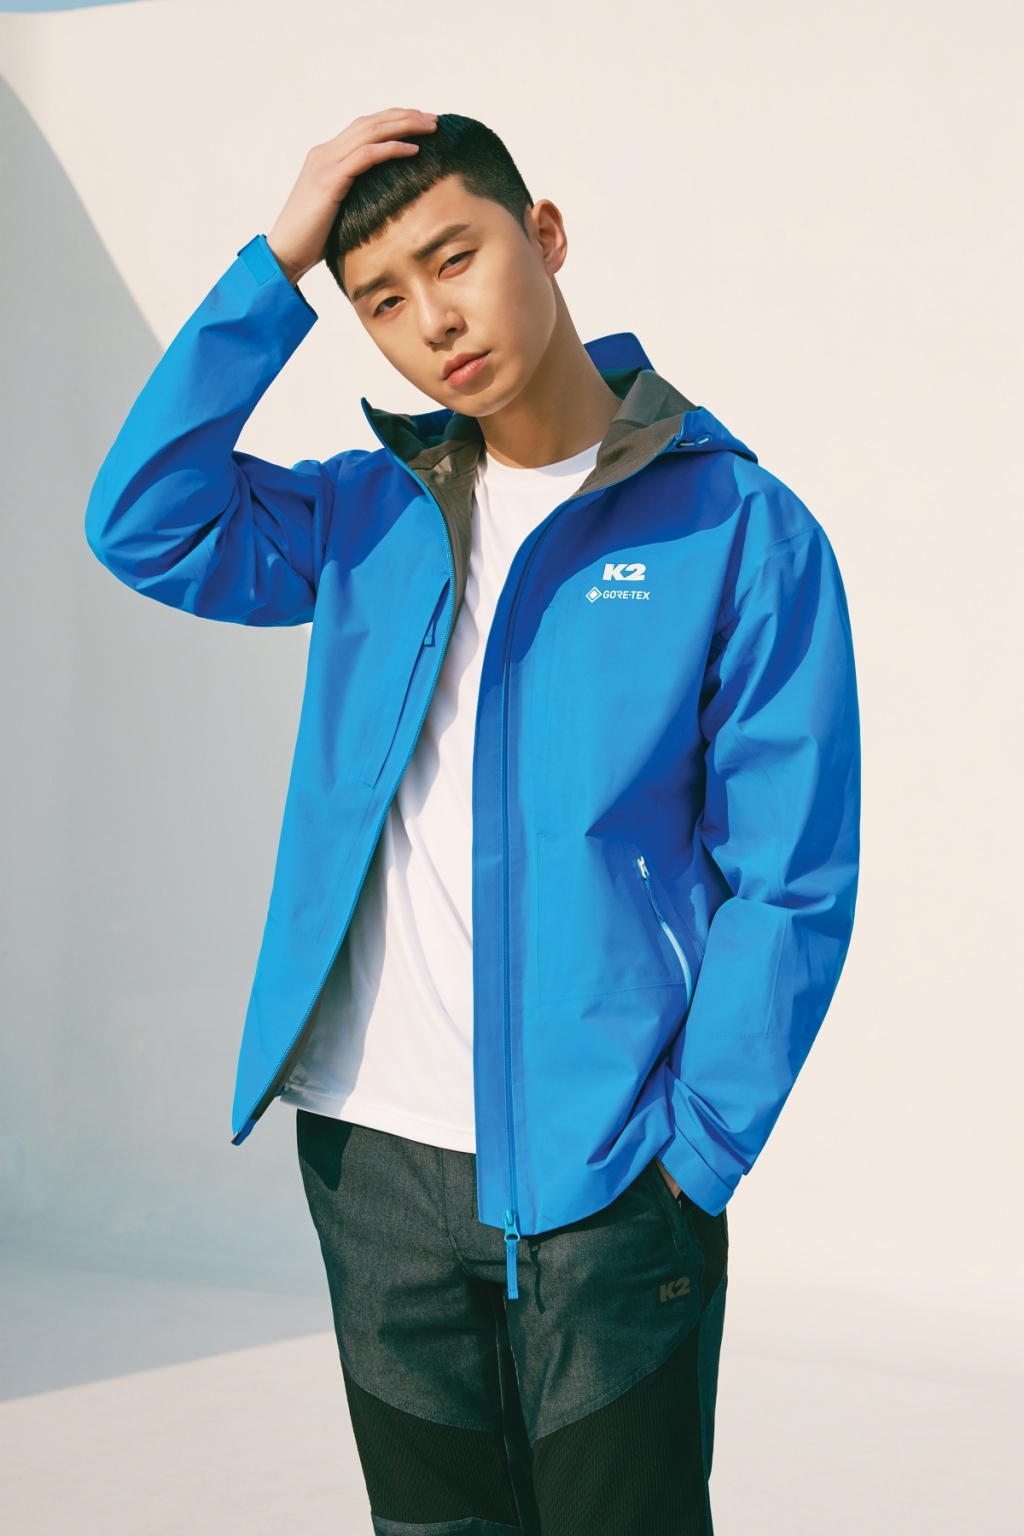 The Outdoor research Research brand K2 unveiled its spring and summer Outdoor research Research picture with its exclusive model, Park Seo-joon, on the 19th.K2 will be hosting the 2020 S/S season, offering a sensual Outdoor research Research look that is free of styling in the city, as well as in the city.Park Seo-joon in the picture presented a light Outdoor research Research look in the background of Ewha-dong, Seoul.He posed in a blue-coloured Gore-Tex windshield jacket, matching a white T-shirt and Outdoor research Research pants to complete a neat lifestyle look.In another cut, Park Seo-joon wore shorts and leggings and a functional T-shirt, with a short-cut hairstyle for the Drama ItaeOne Clath emphasizing his intense eyes.Lee Yang-yeop, director of K2 clothing planning team, said, In this spring and summer season, we will show products that can be used in various lifestyles by adding Sesame Sesame street sensibility and sensual style as well as Outdoor research Research functionality. I hope you will prepare for spring by referring to Park Seo-joons Outdoor research Research styling.K2, Park Seo-joon with 2020 spring and summer pictures released